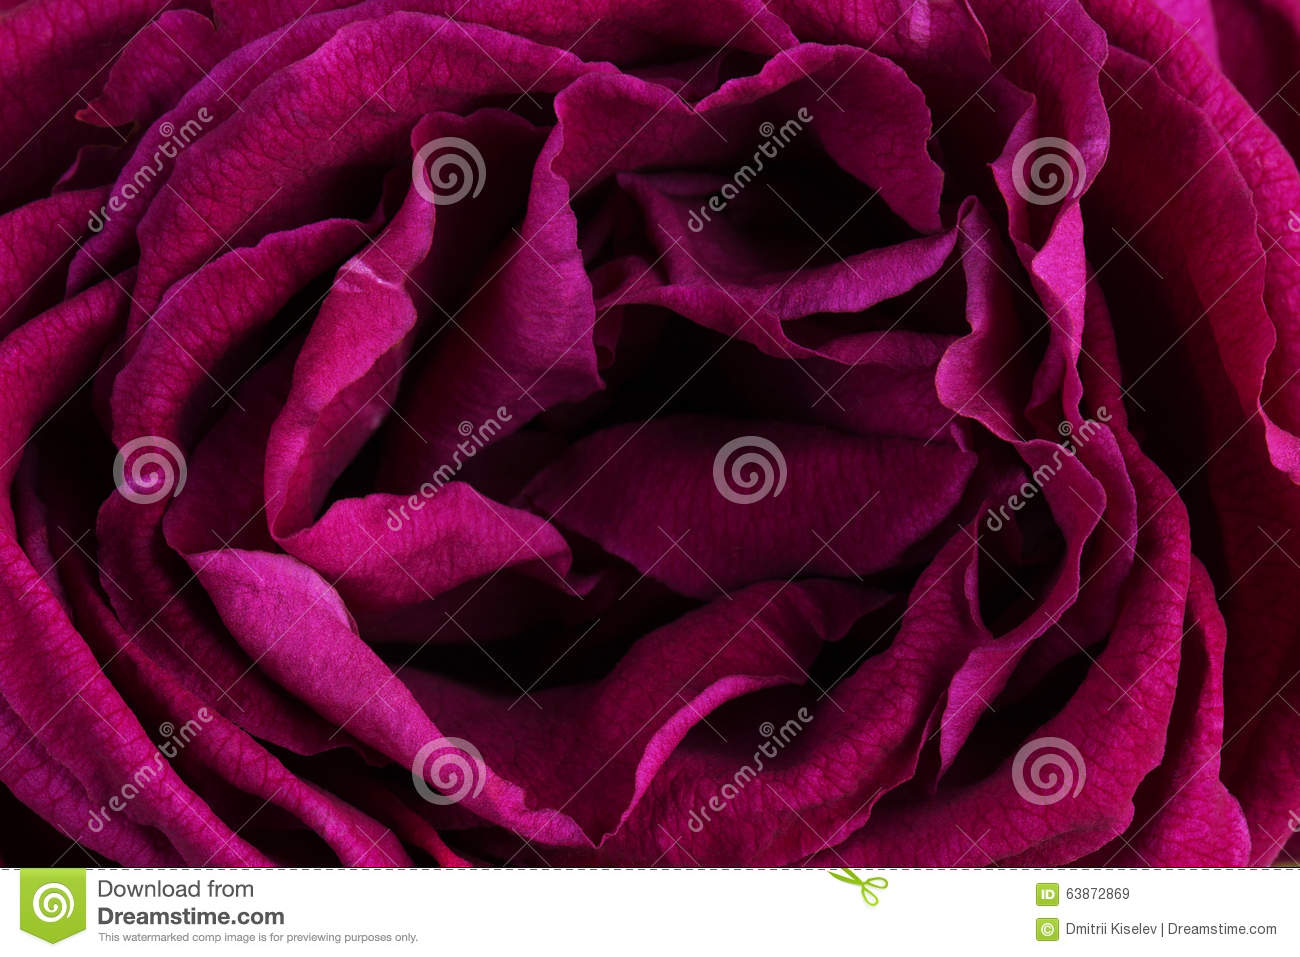 Related Keywords & Suggestions for Rose Plant With Thorns Clipart.